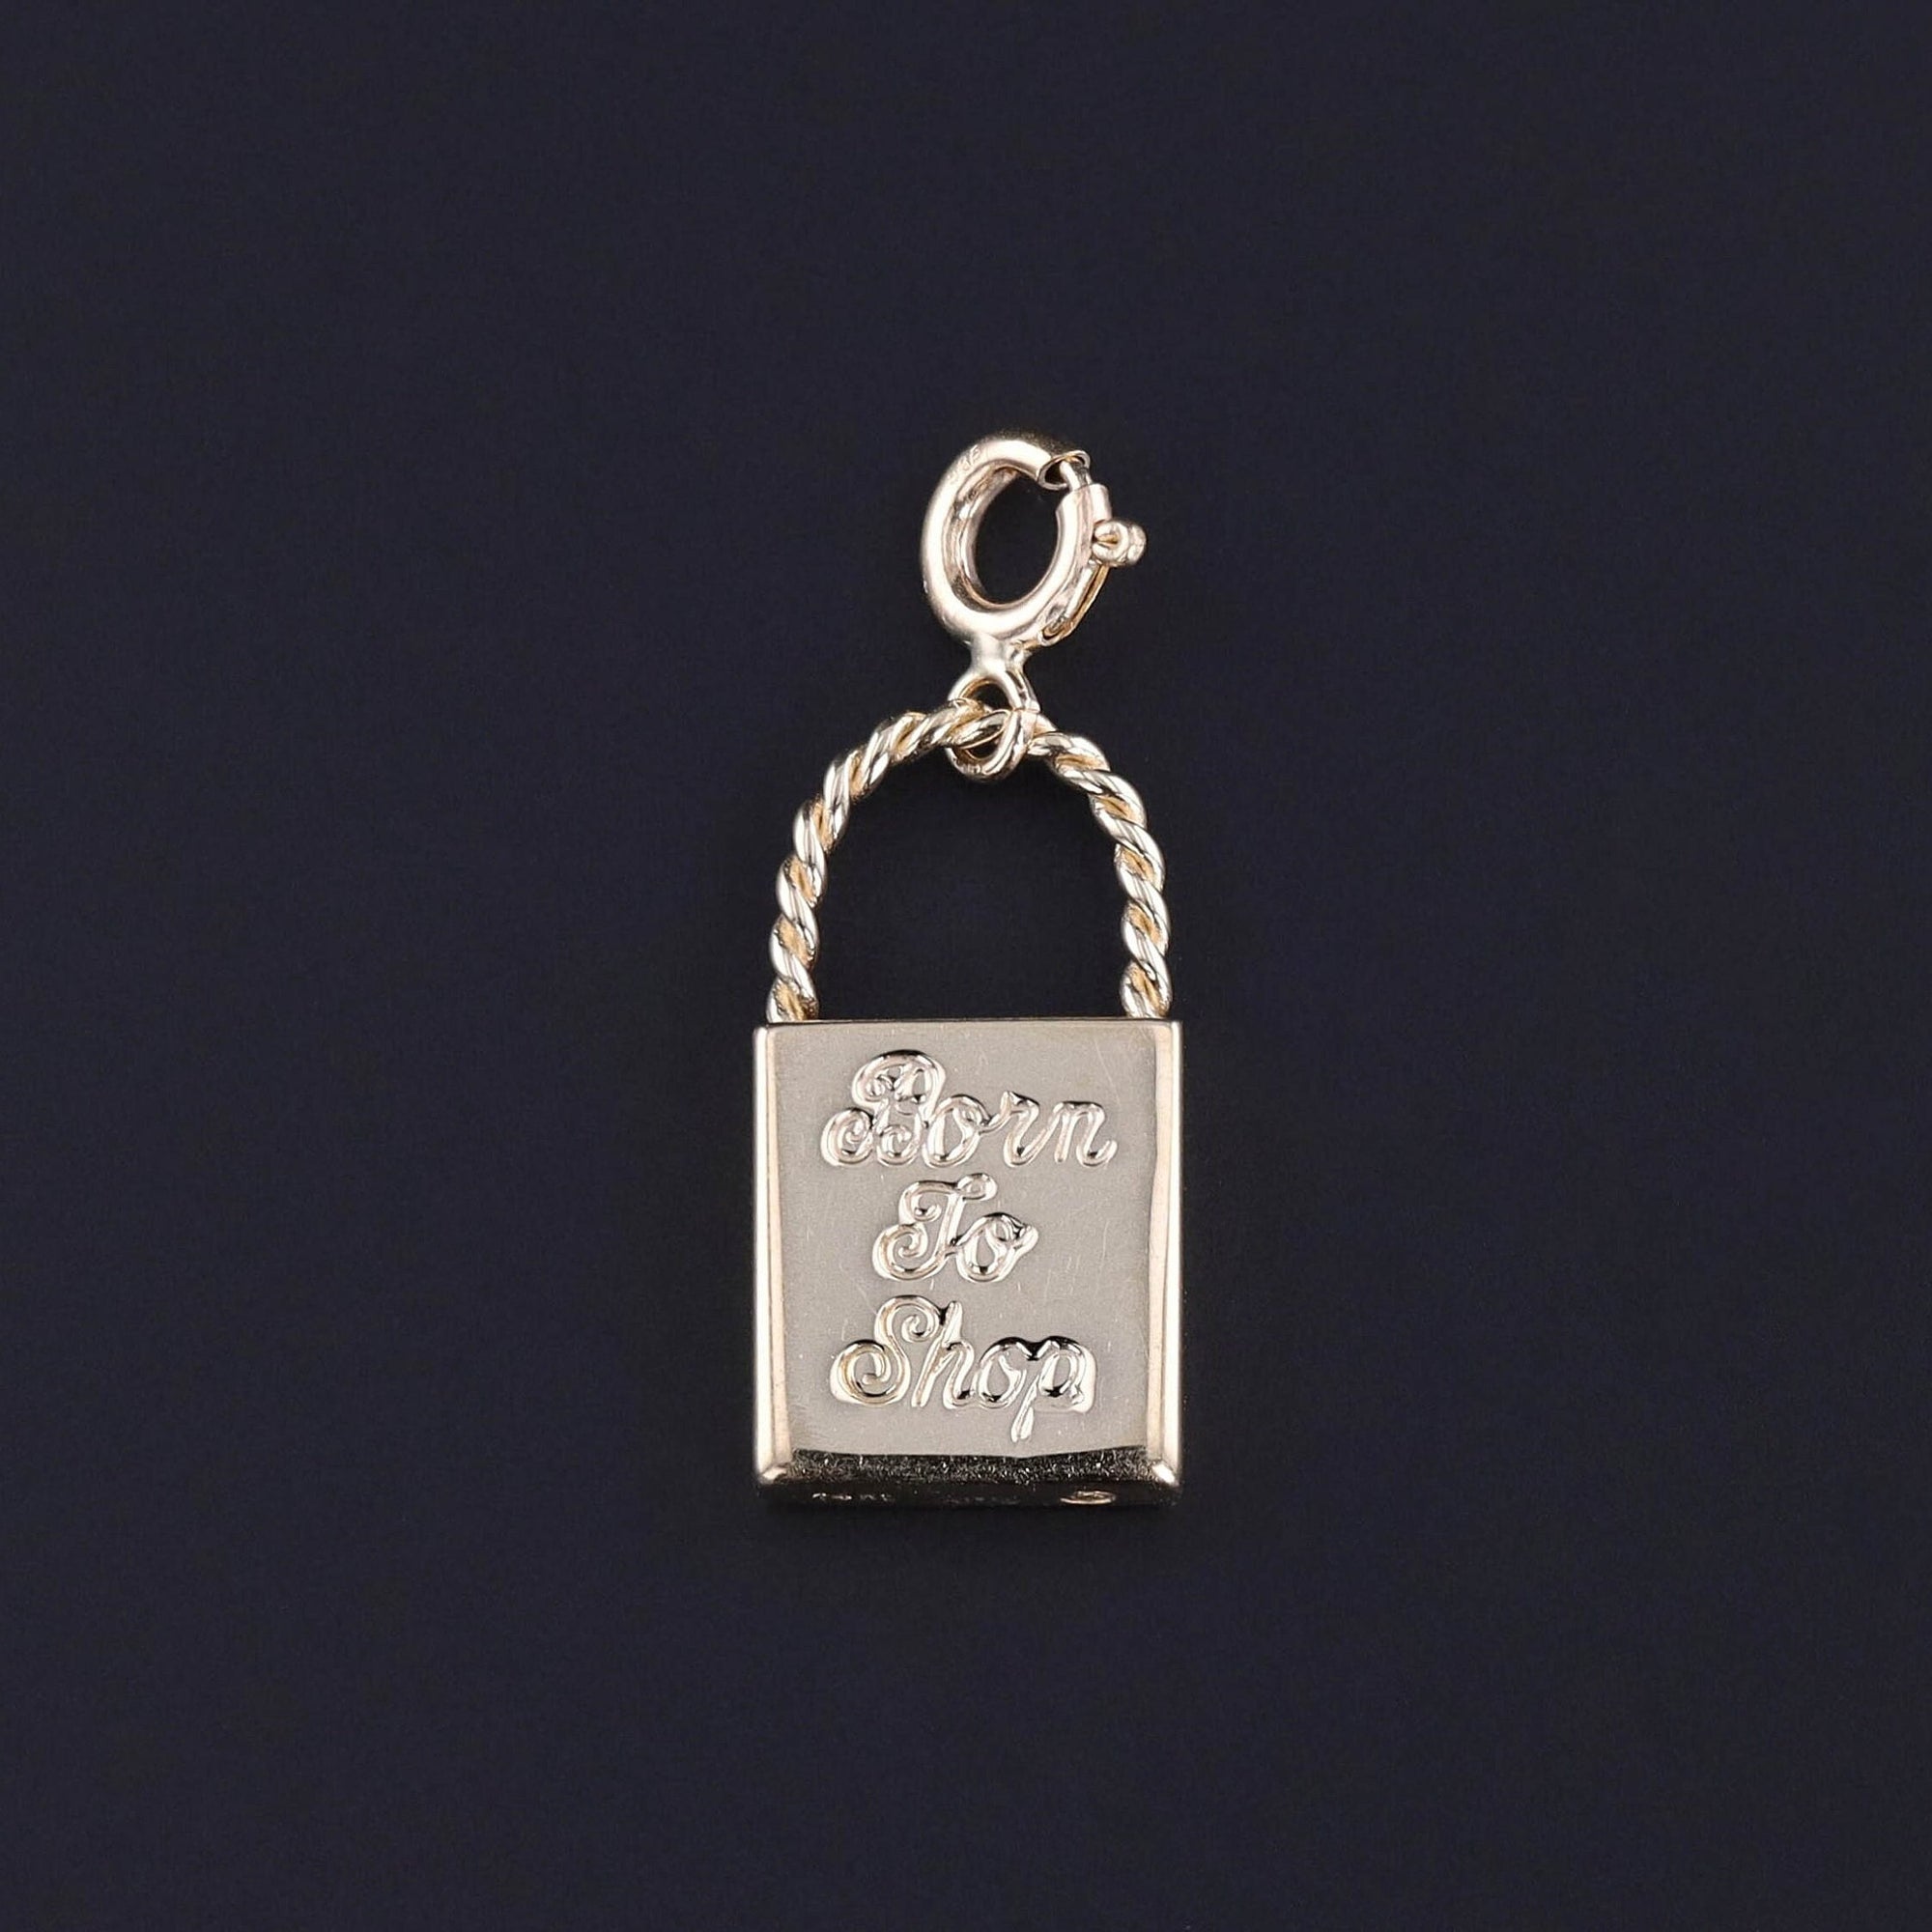 Vintage 'Born to Shop' Charm of 14k Gold